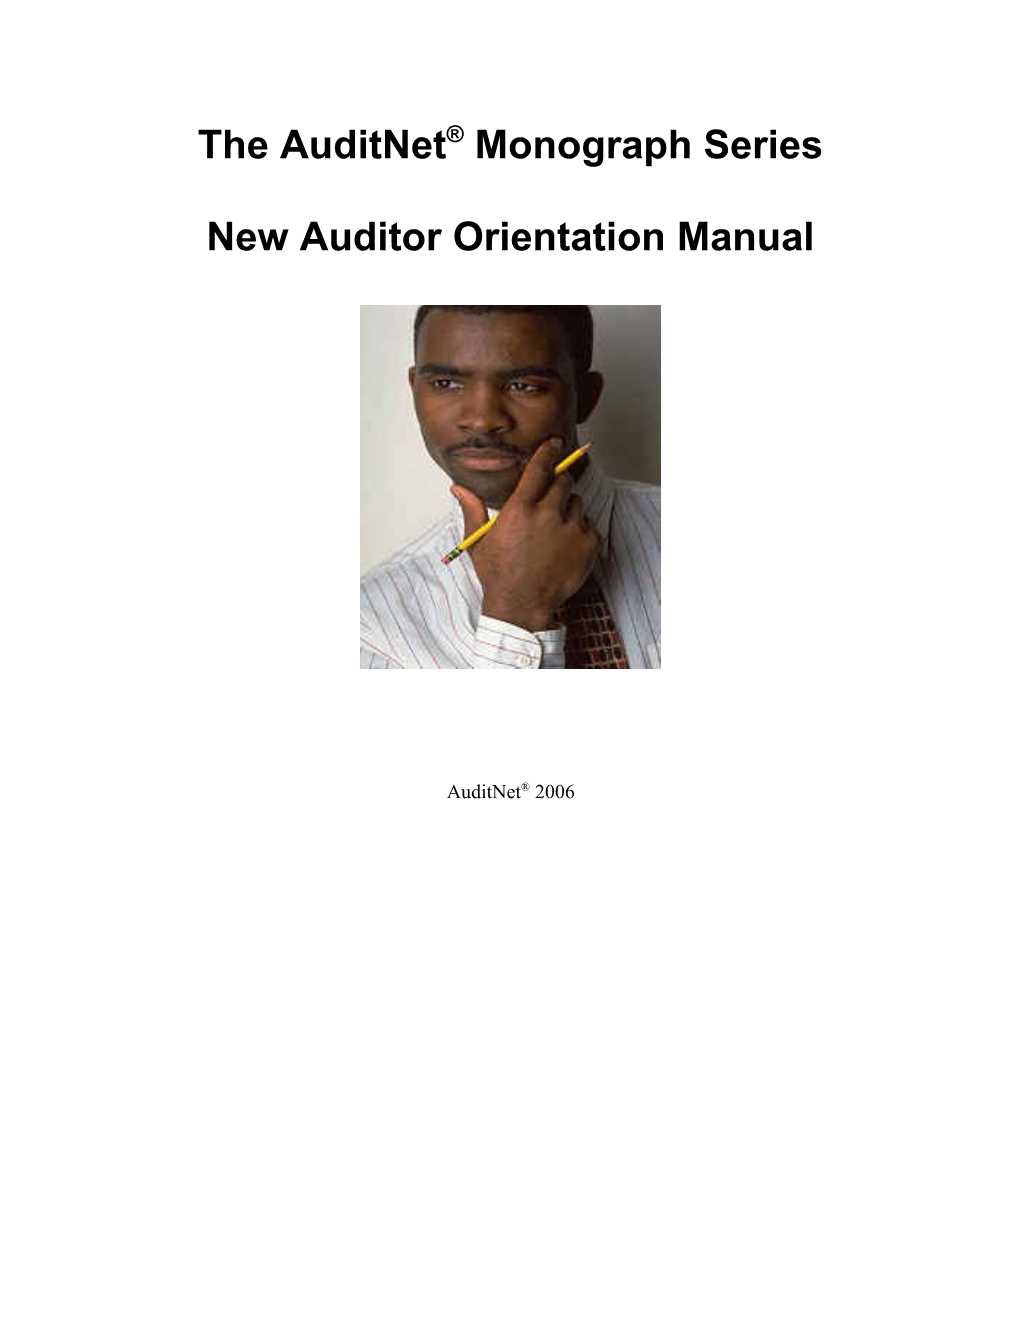 Auditnet Guides for Auditors